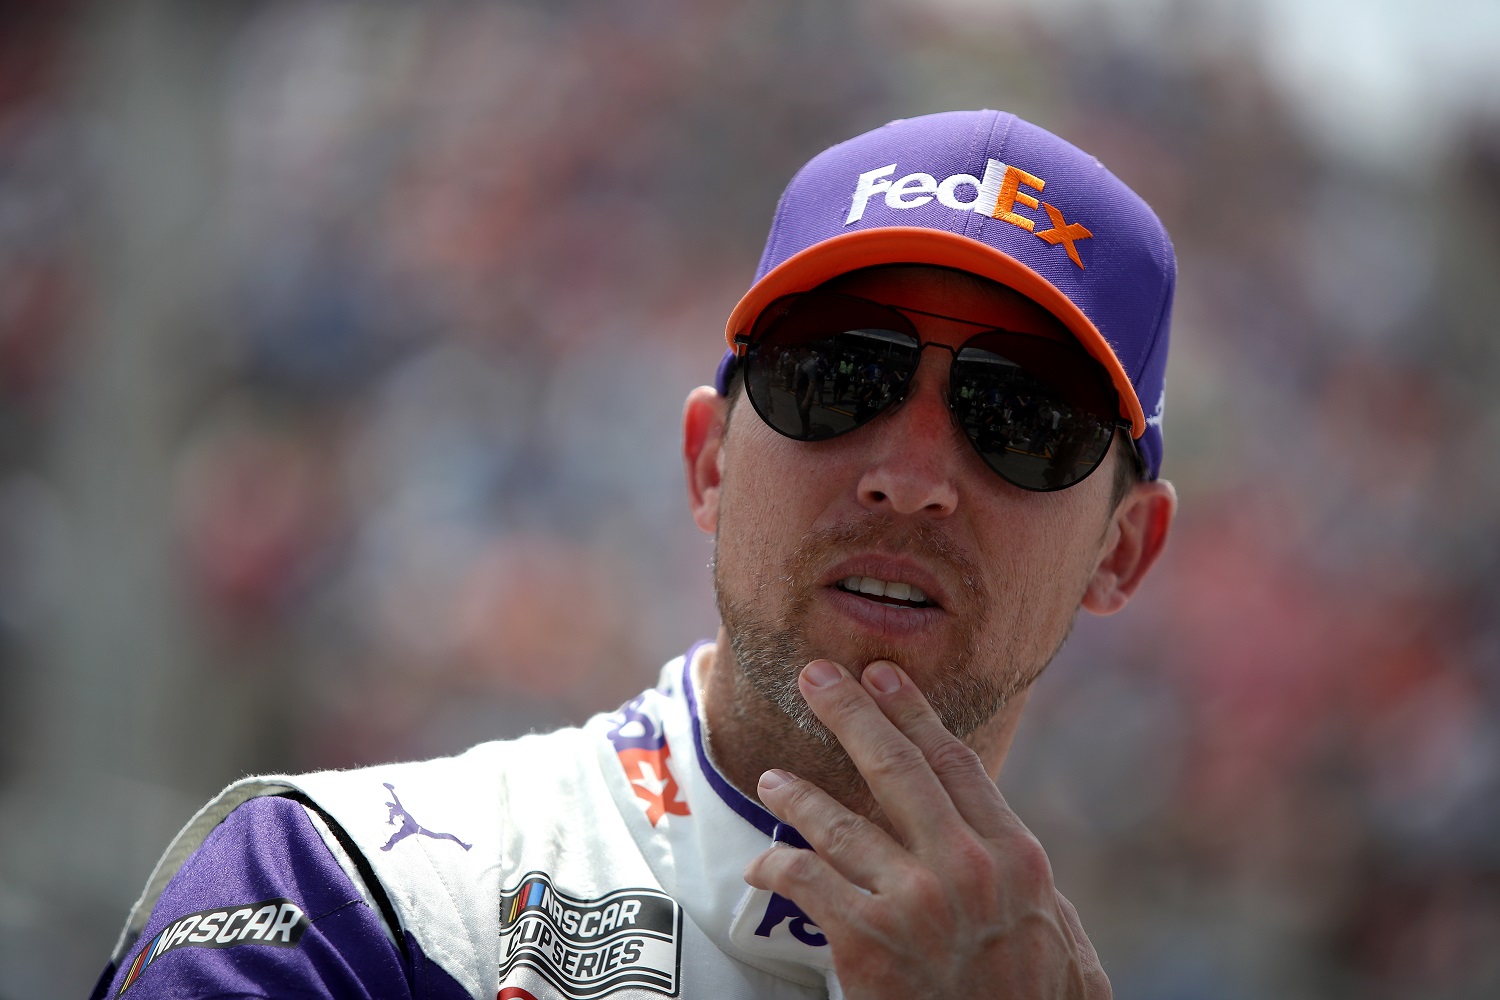 Denny Hamlin looks on during the NASCAR Cup Series Enjoy Illinois 300 at WWT Raceway on June 5, 2022 in Madison, Illinois.